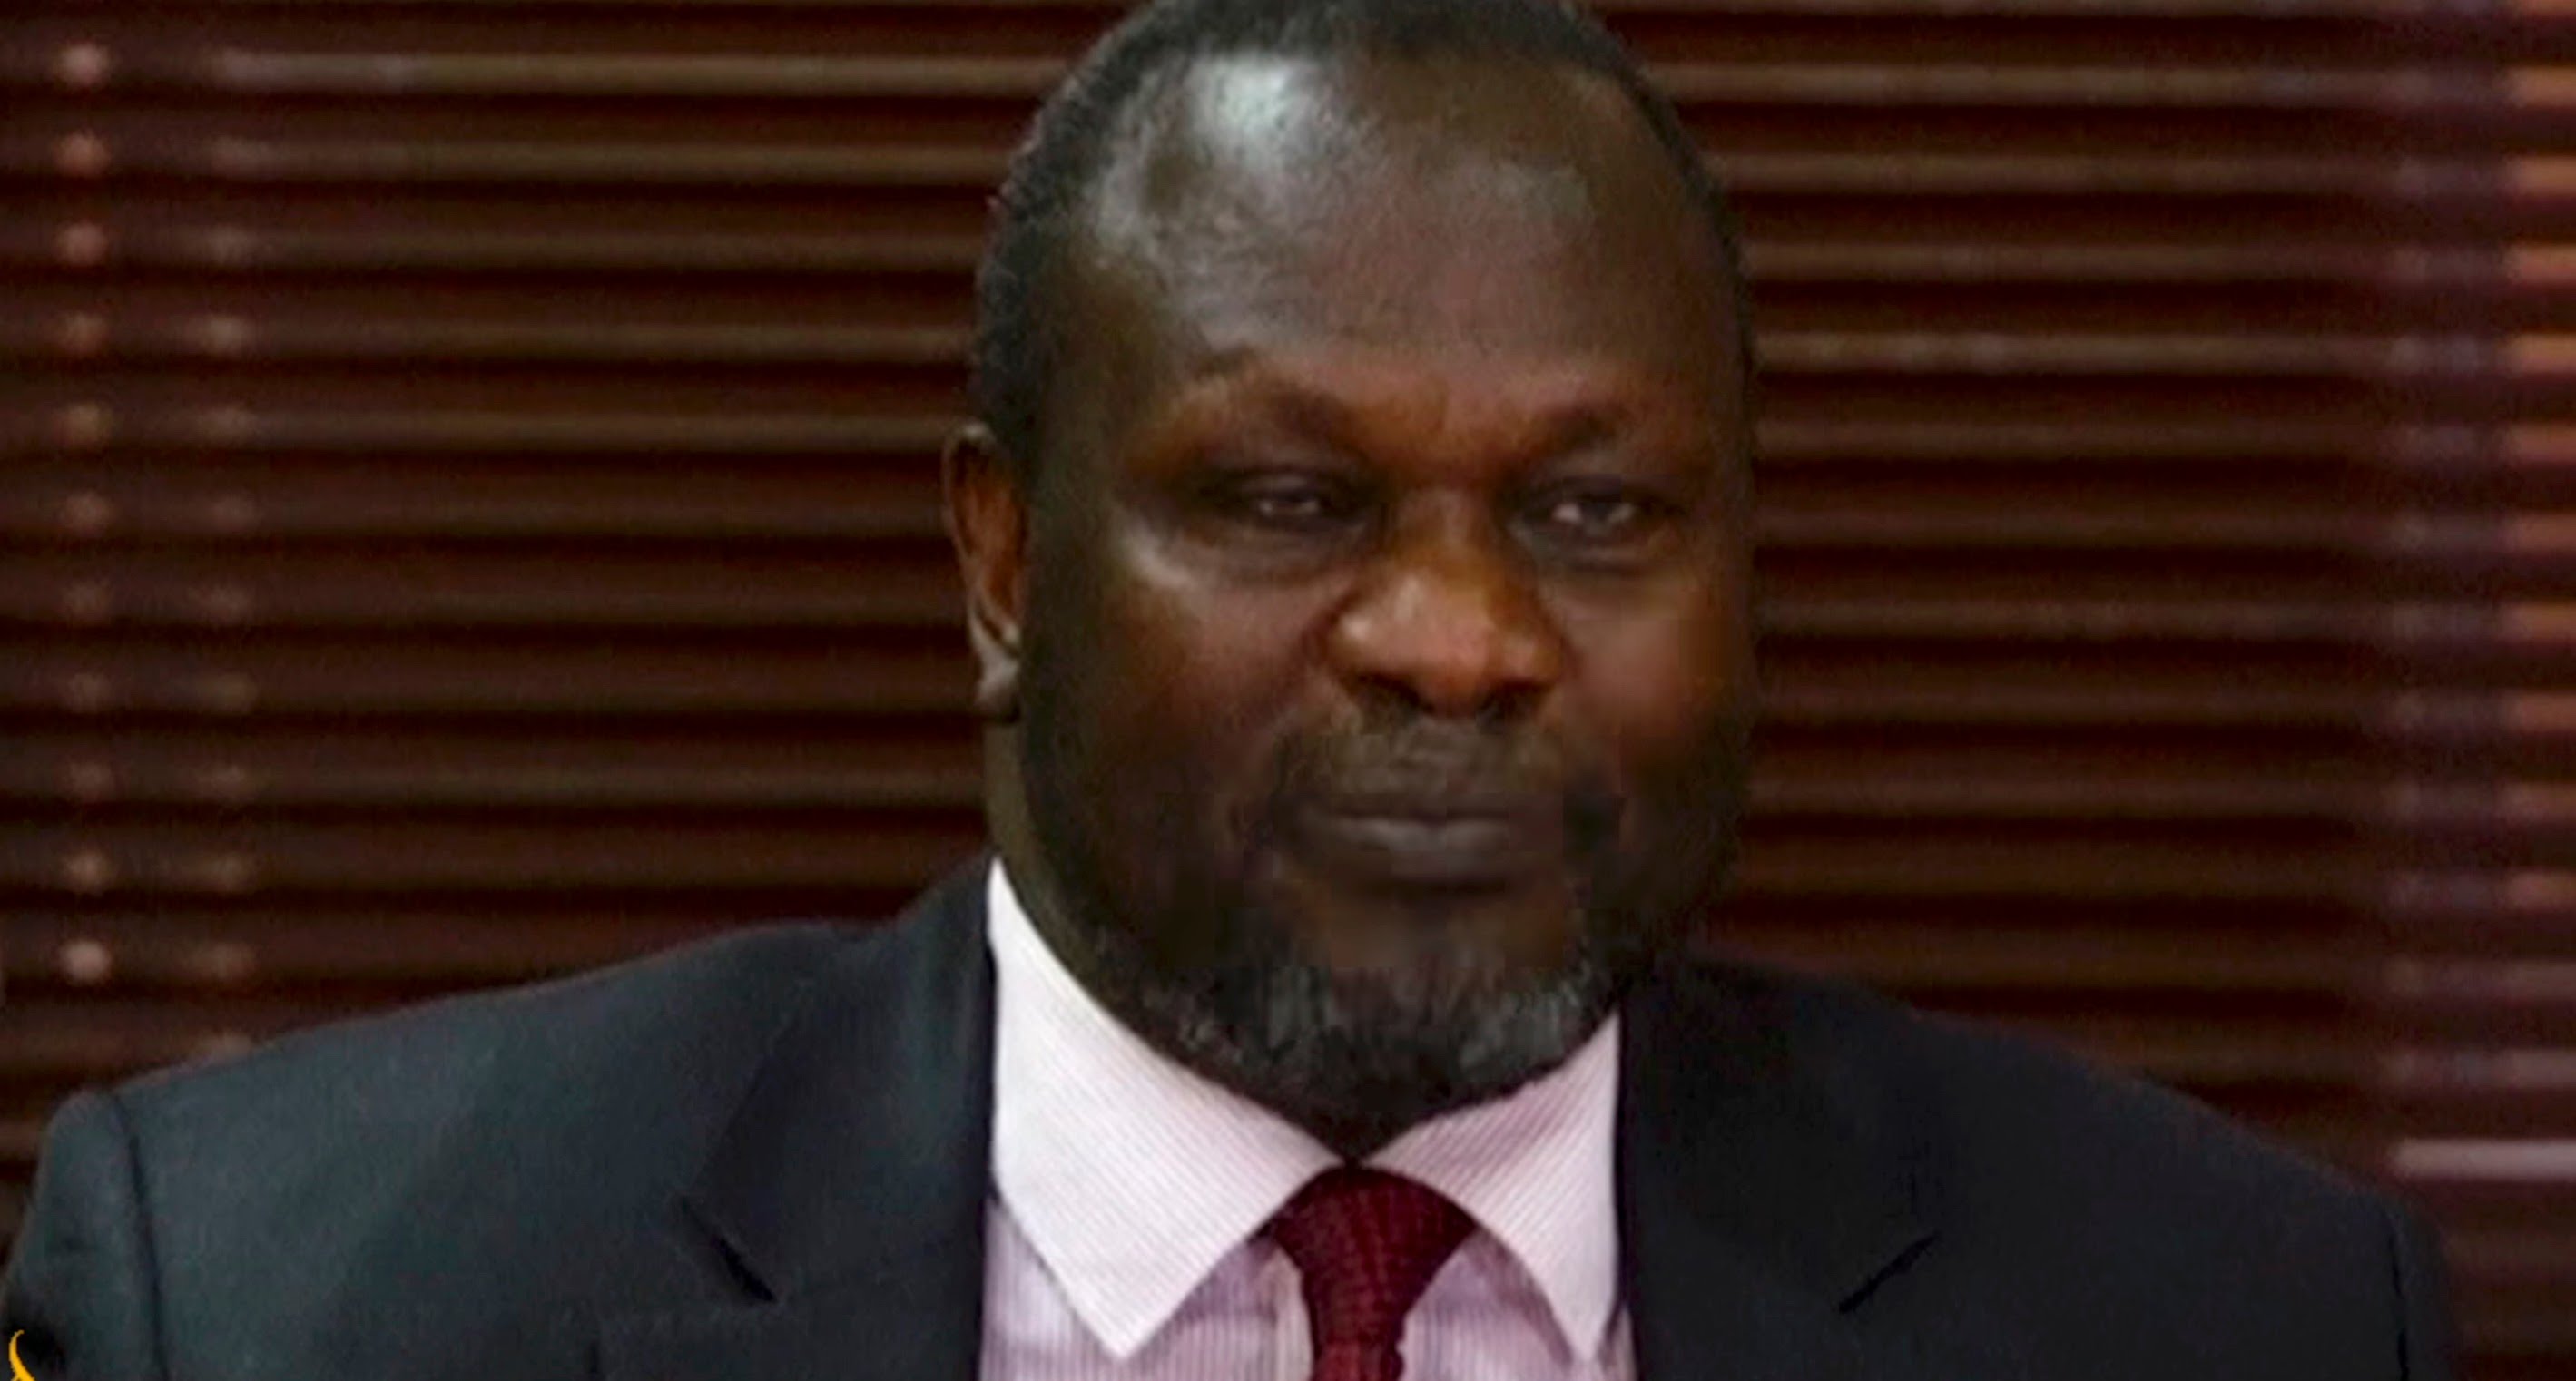 Interview with Riek Machar in South Sudan